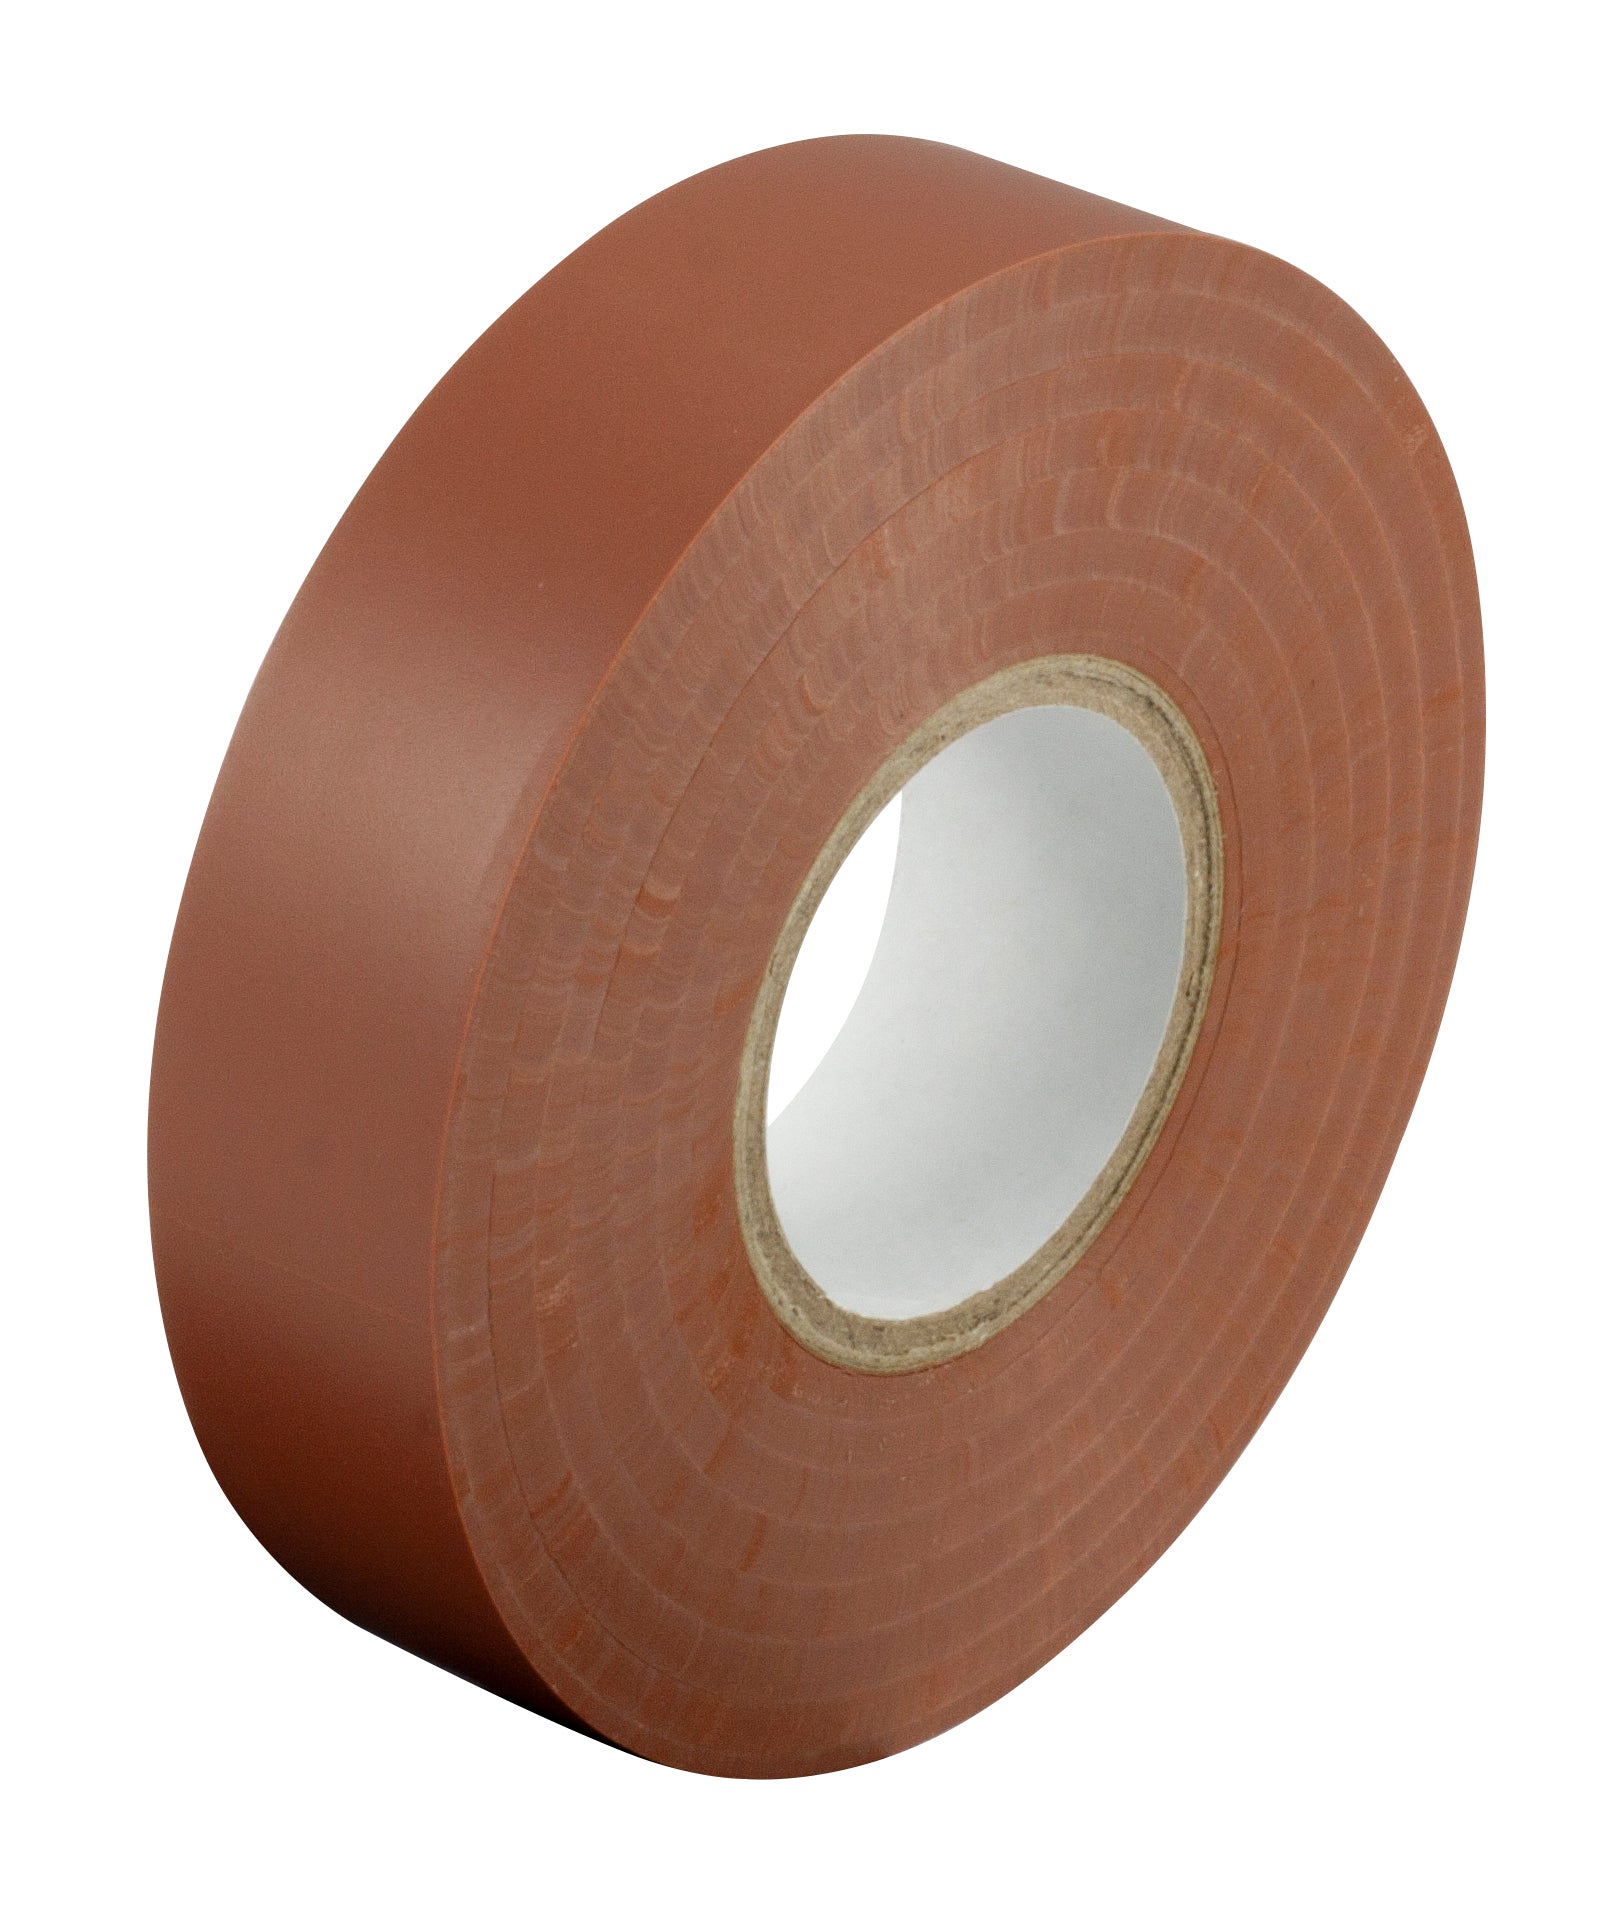 PVC Tape Size: 19mmx20m Roll - Brown - Pack of 10